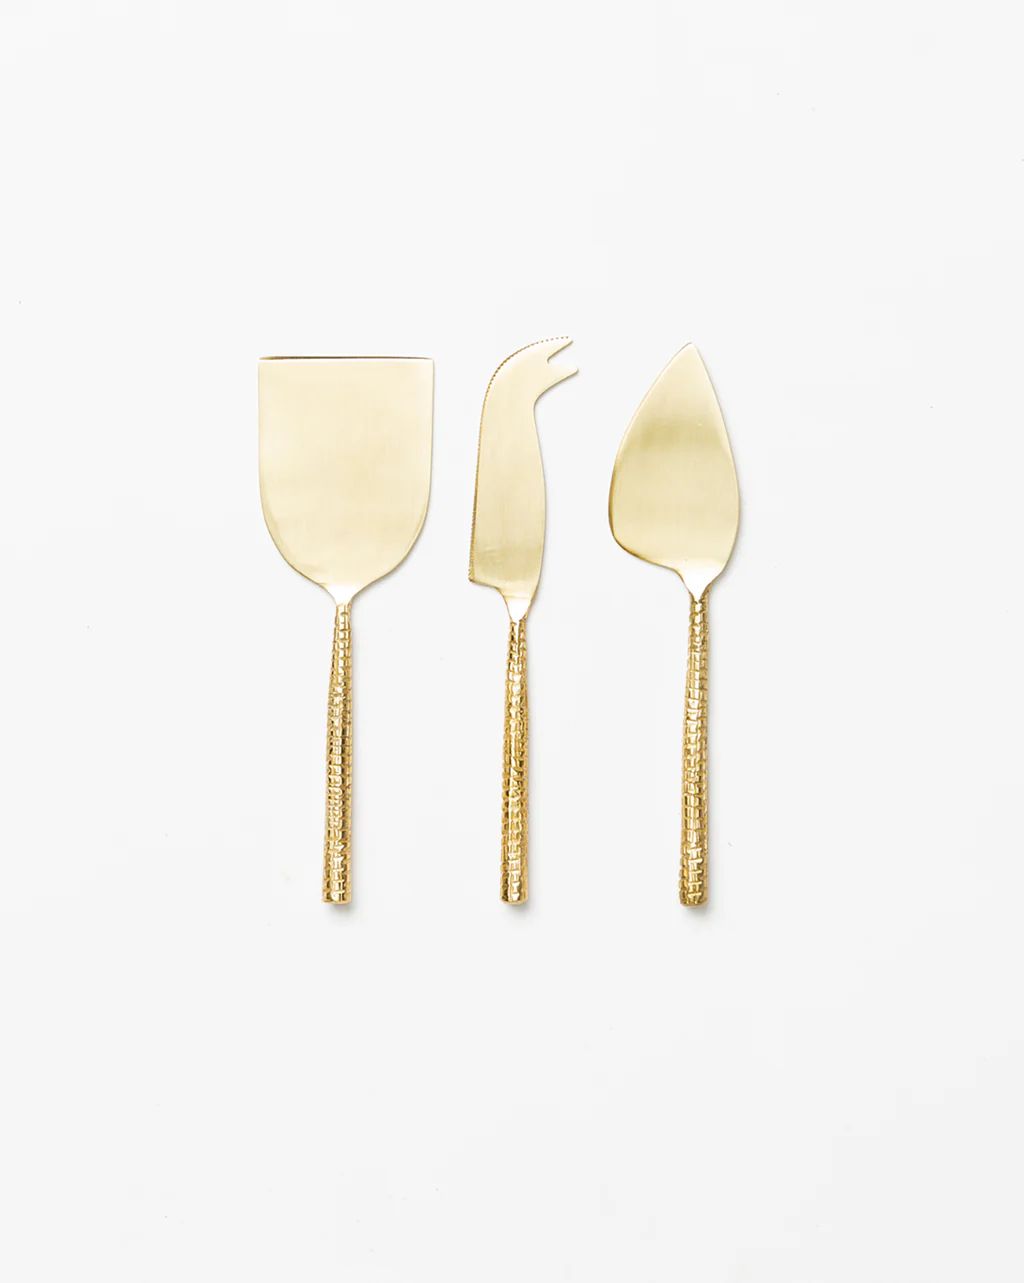 Gold Hammered Cheese Knives (Set of 3) | McGee & Co.